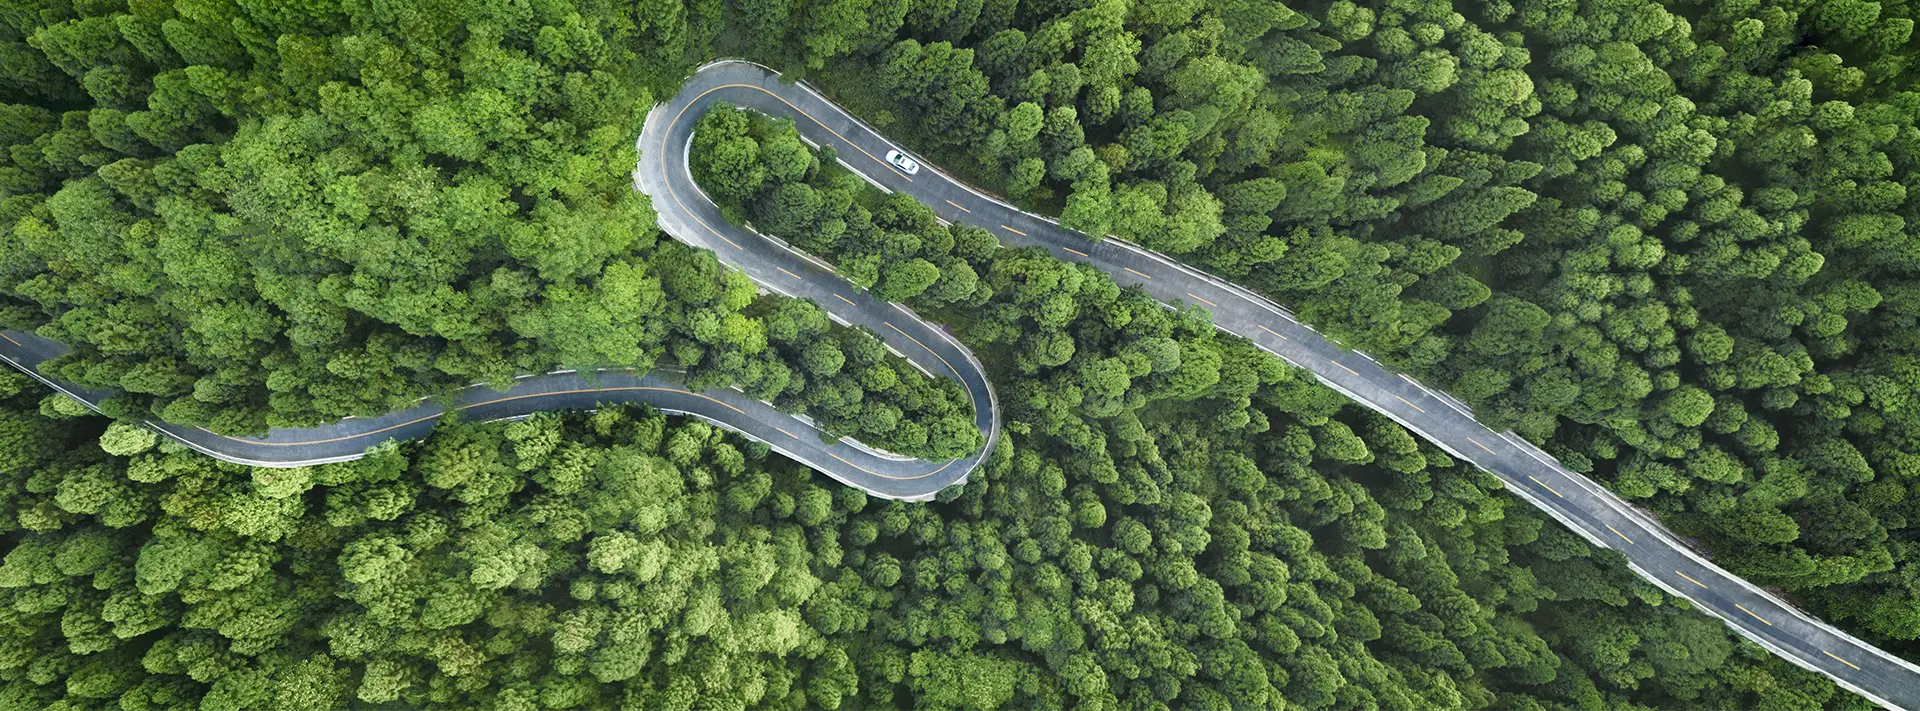 aerial view of a road with a car